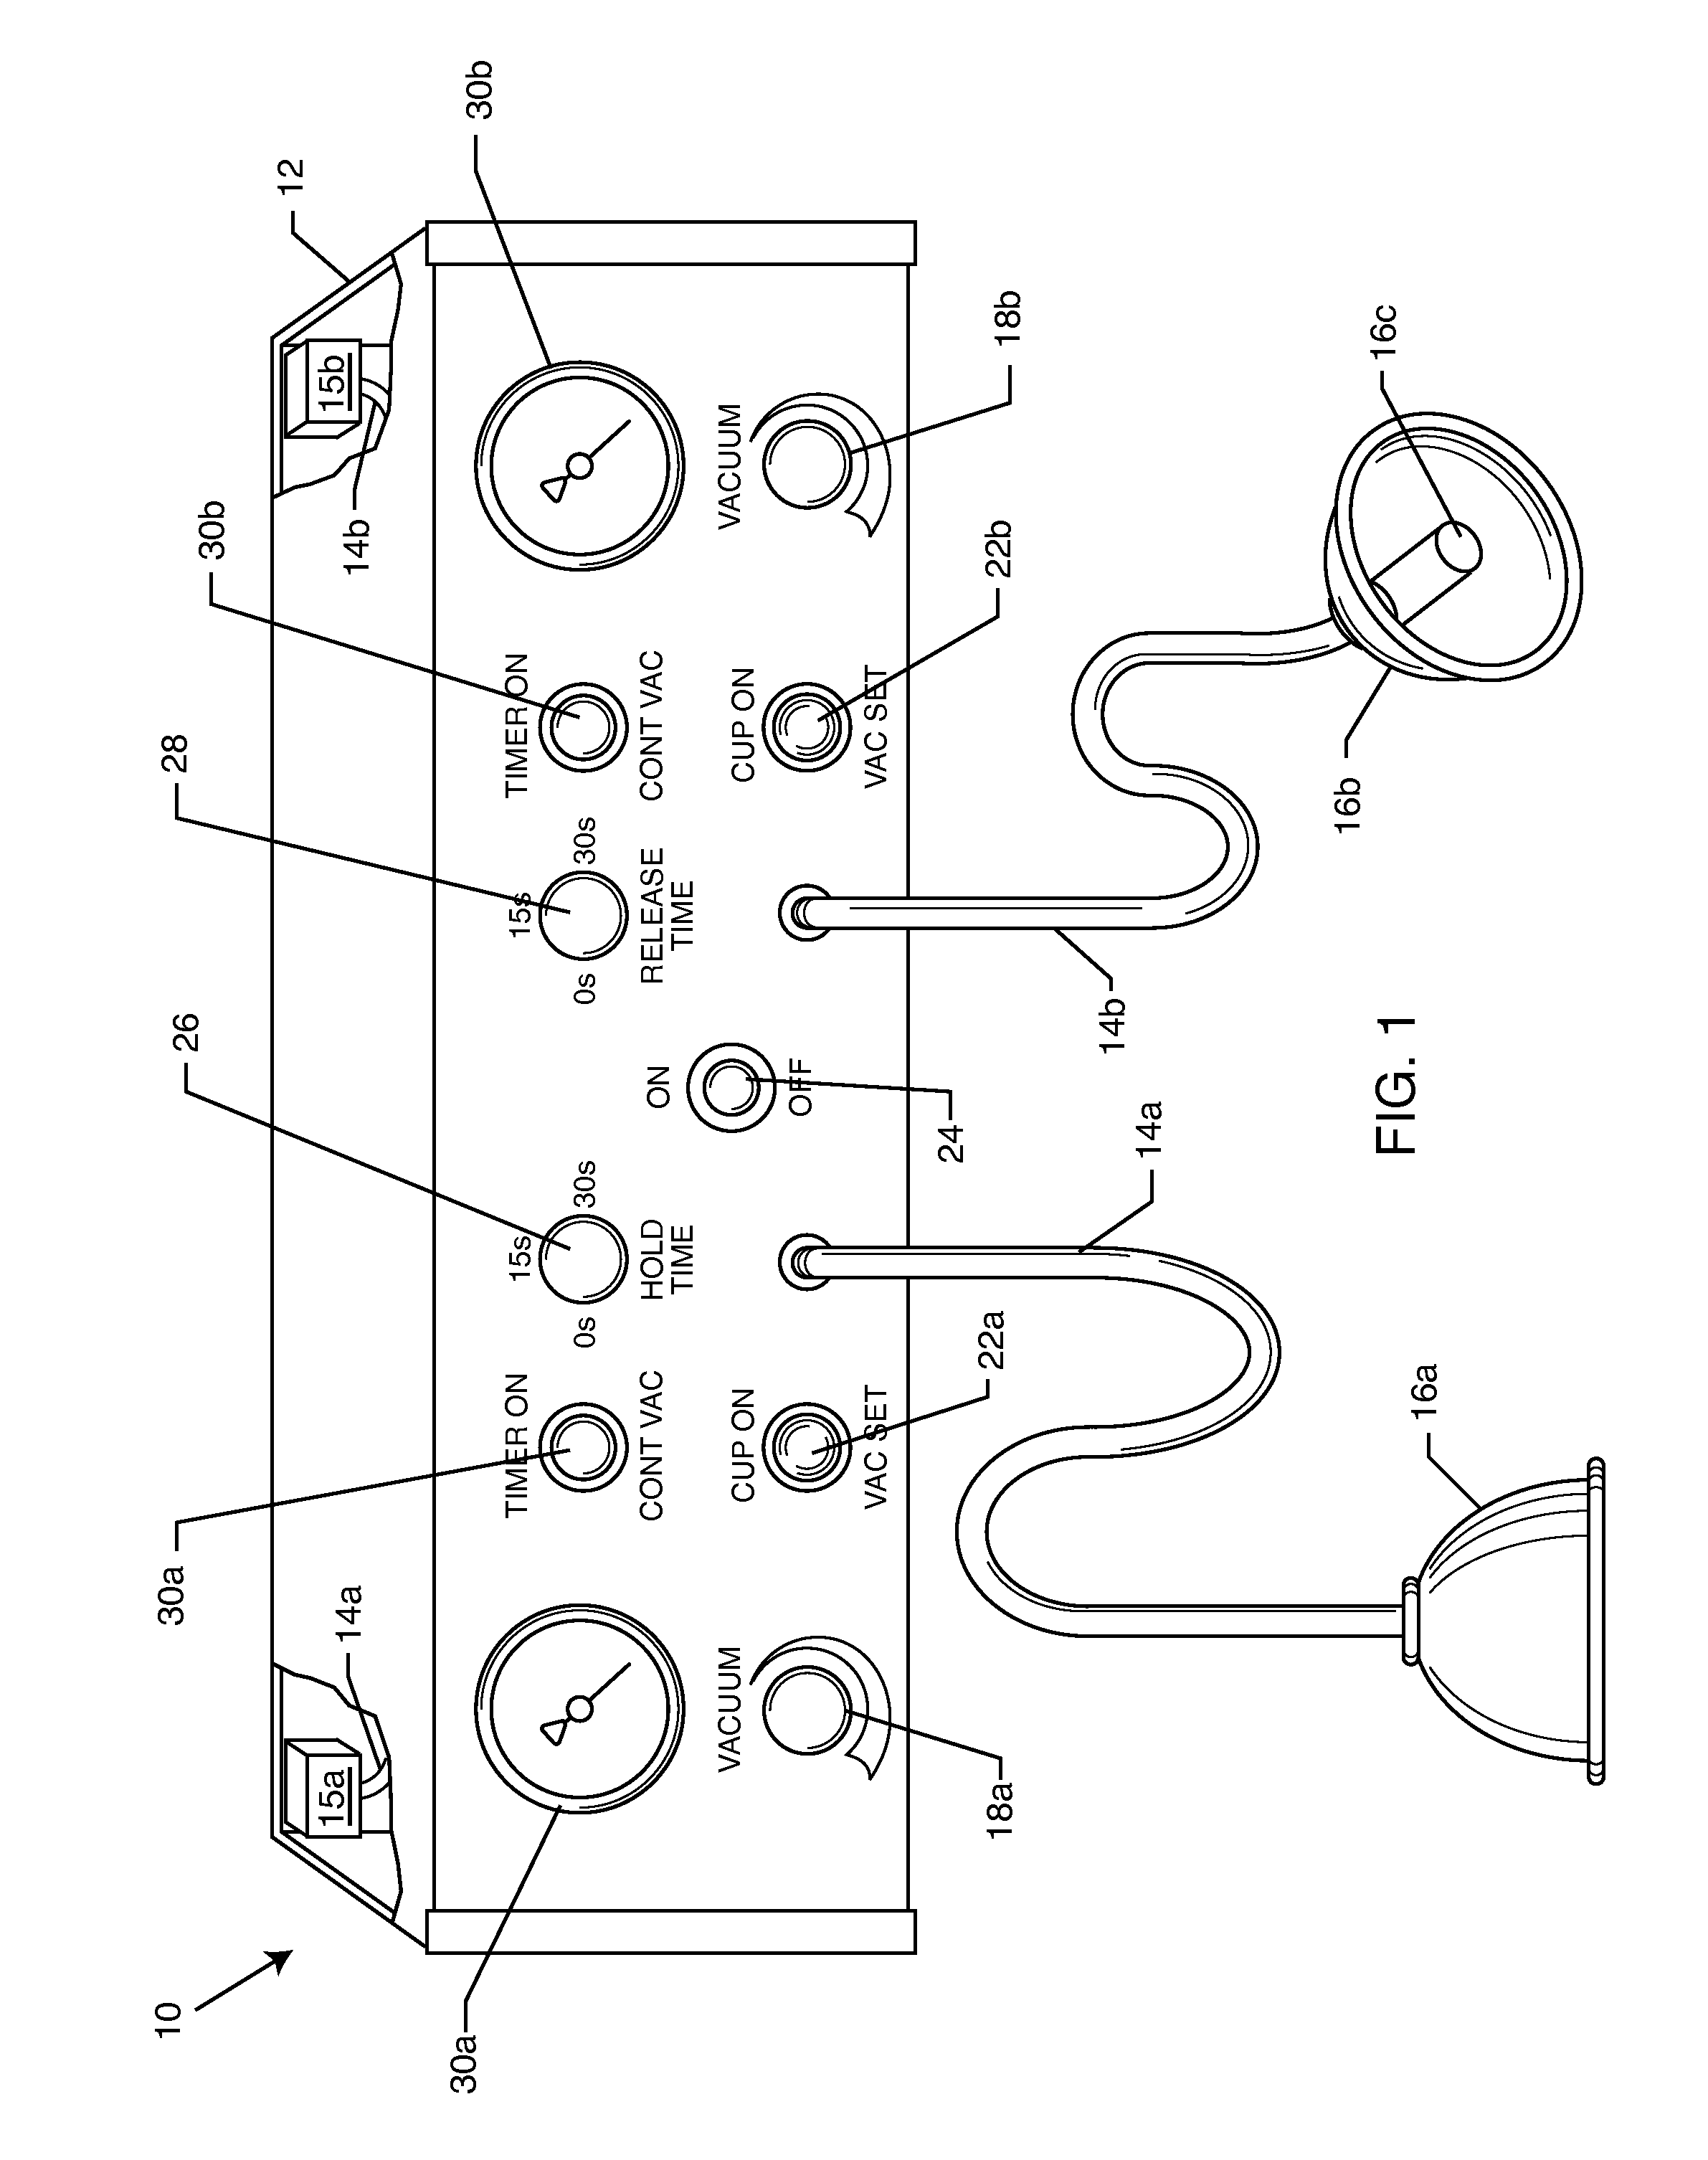 Process and apparatus for soft tissue manipulation